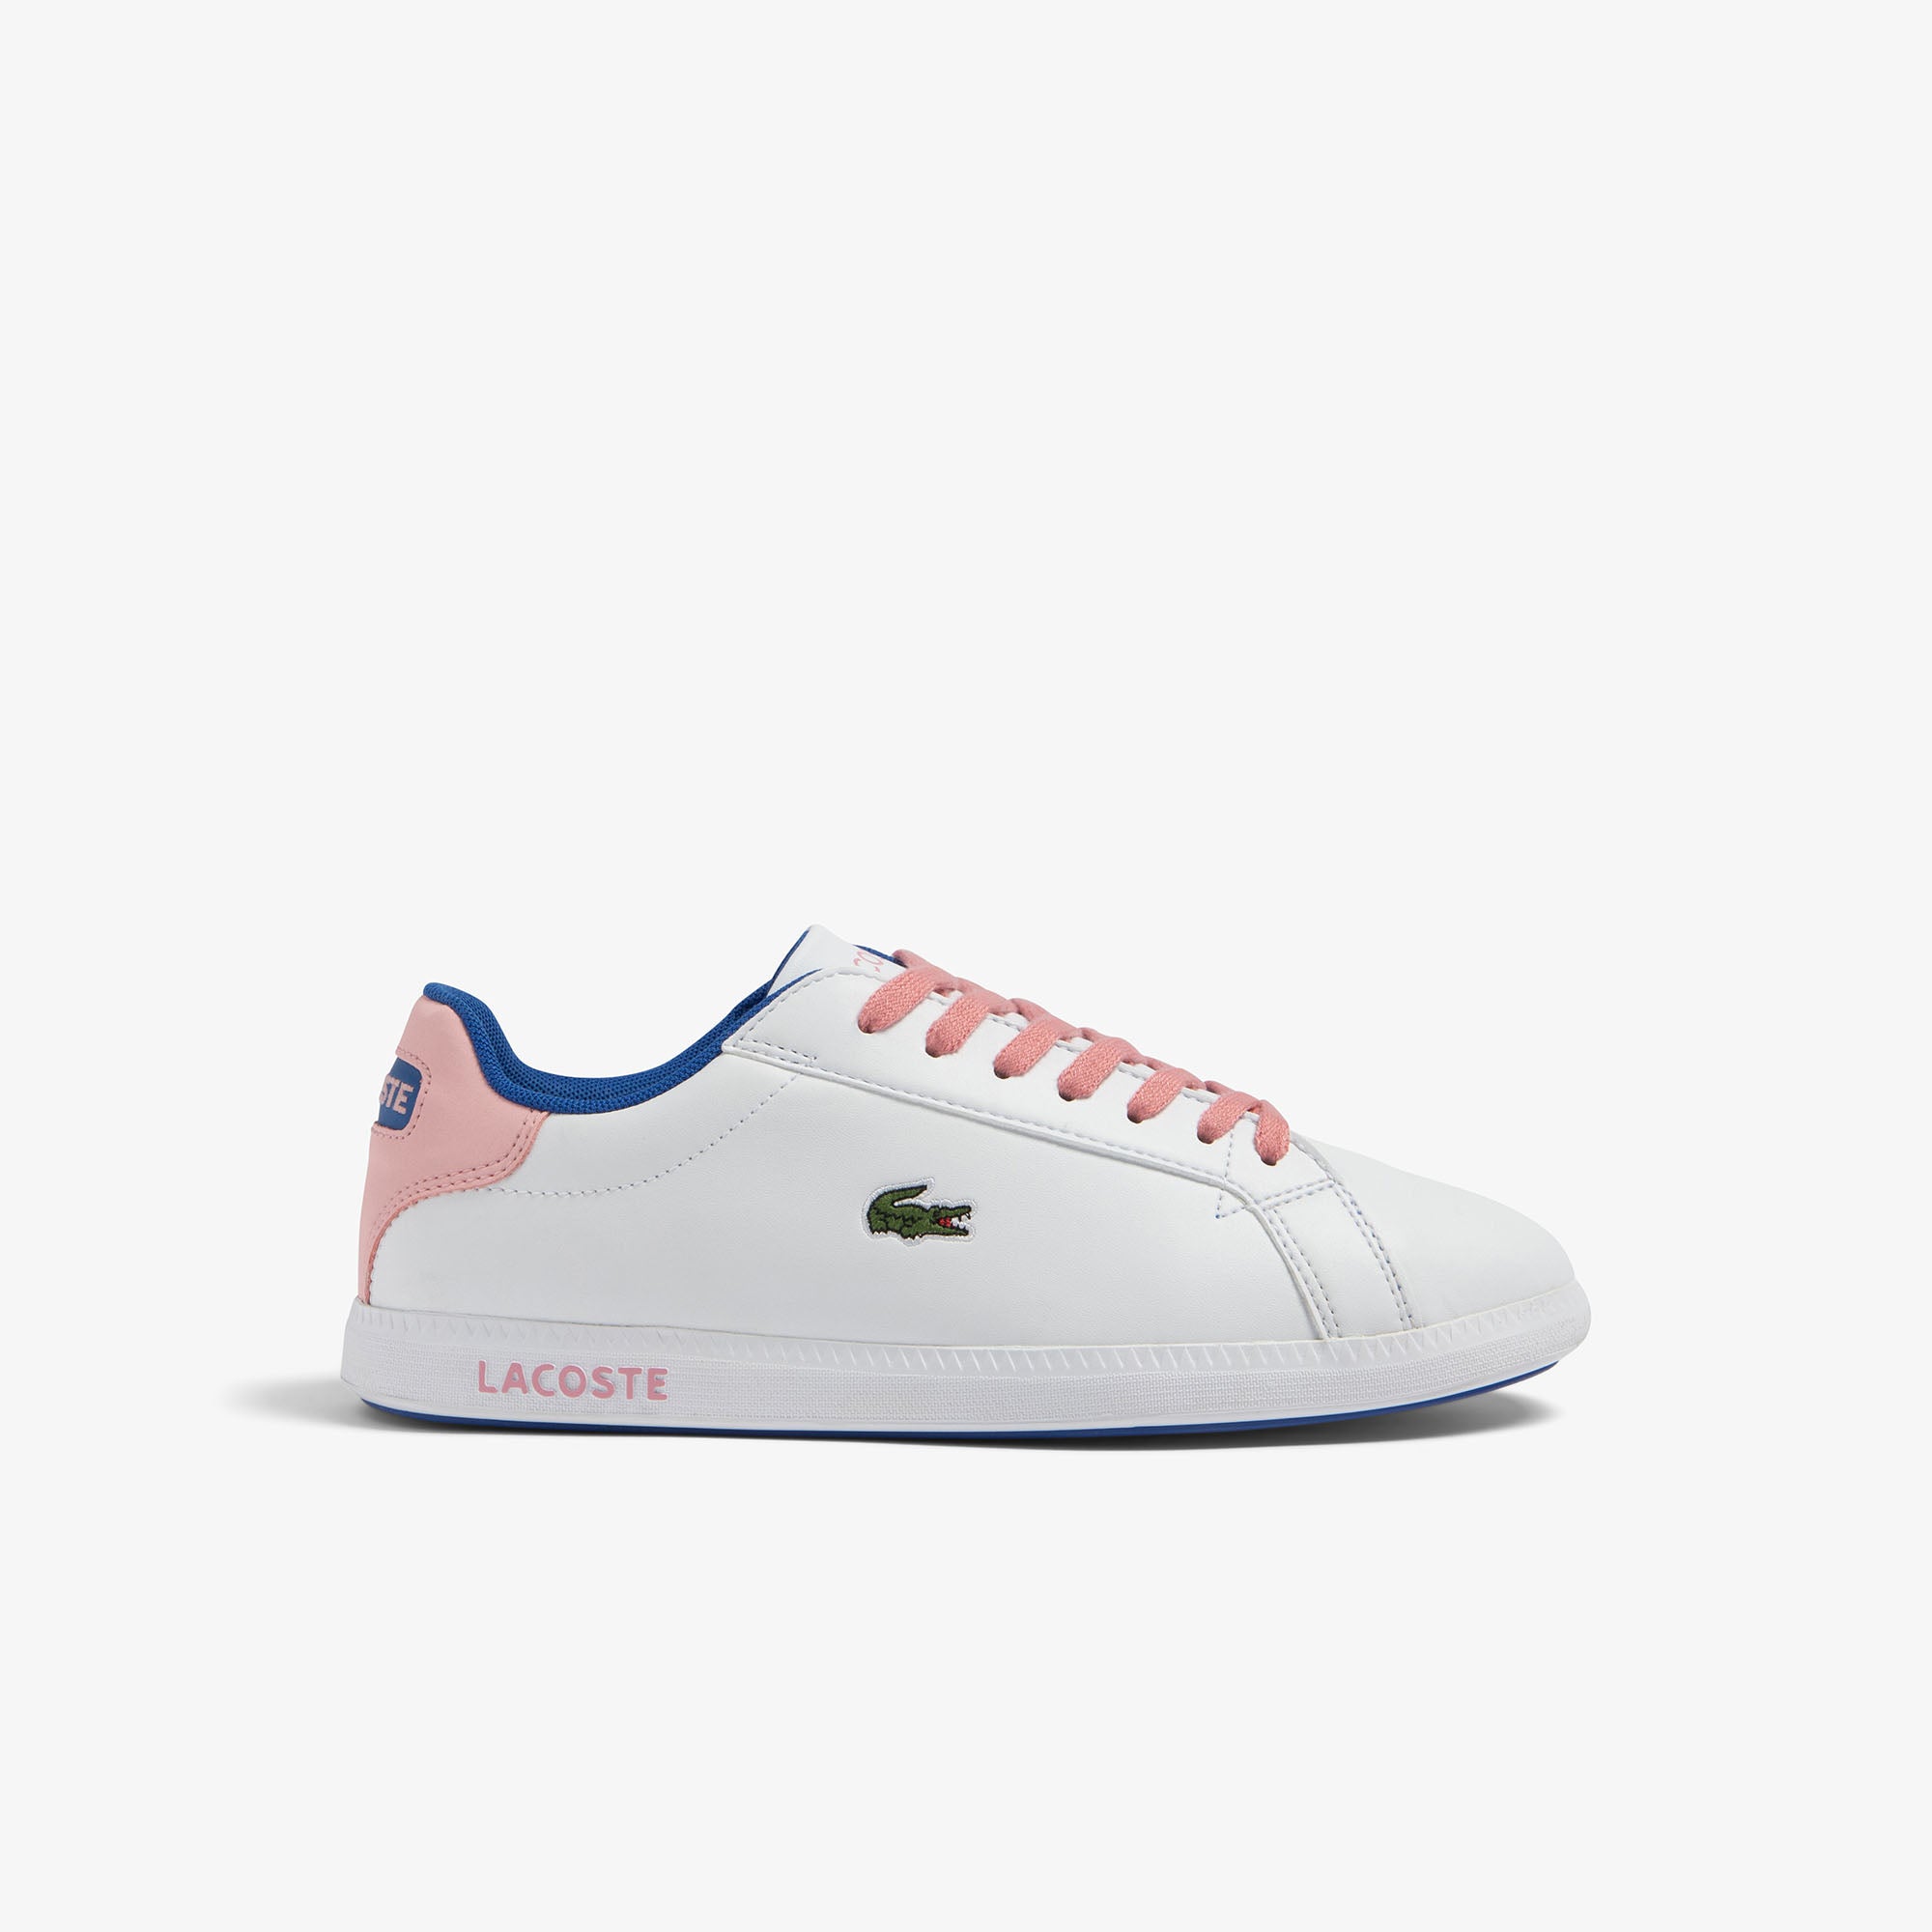 Shop The Latest Collection Of Lacoste Juniors' Lacoste Graduate Synthetic Trainers - 45Suj00051Y9 In Lebanon